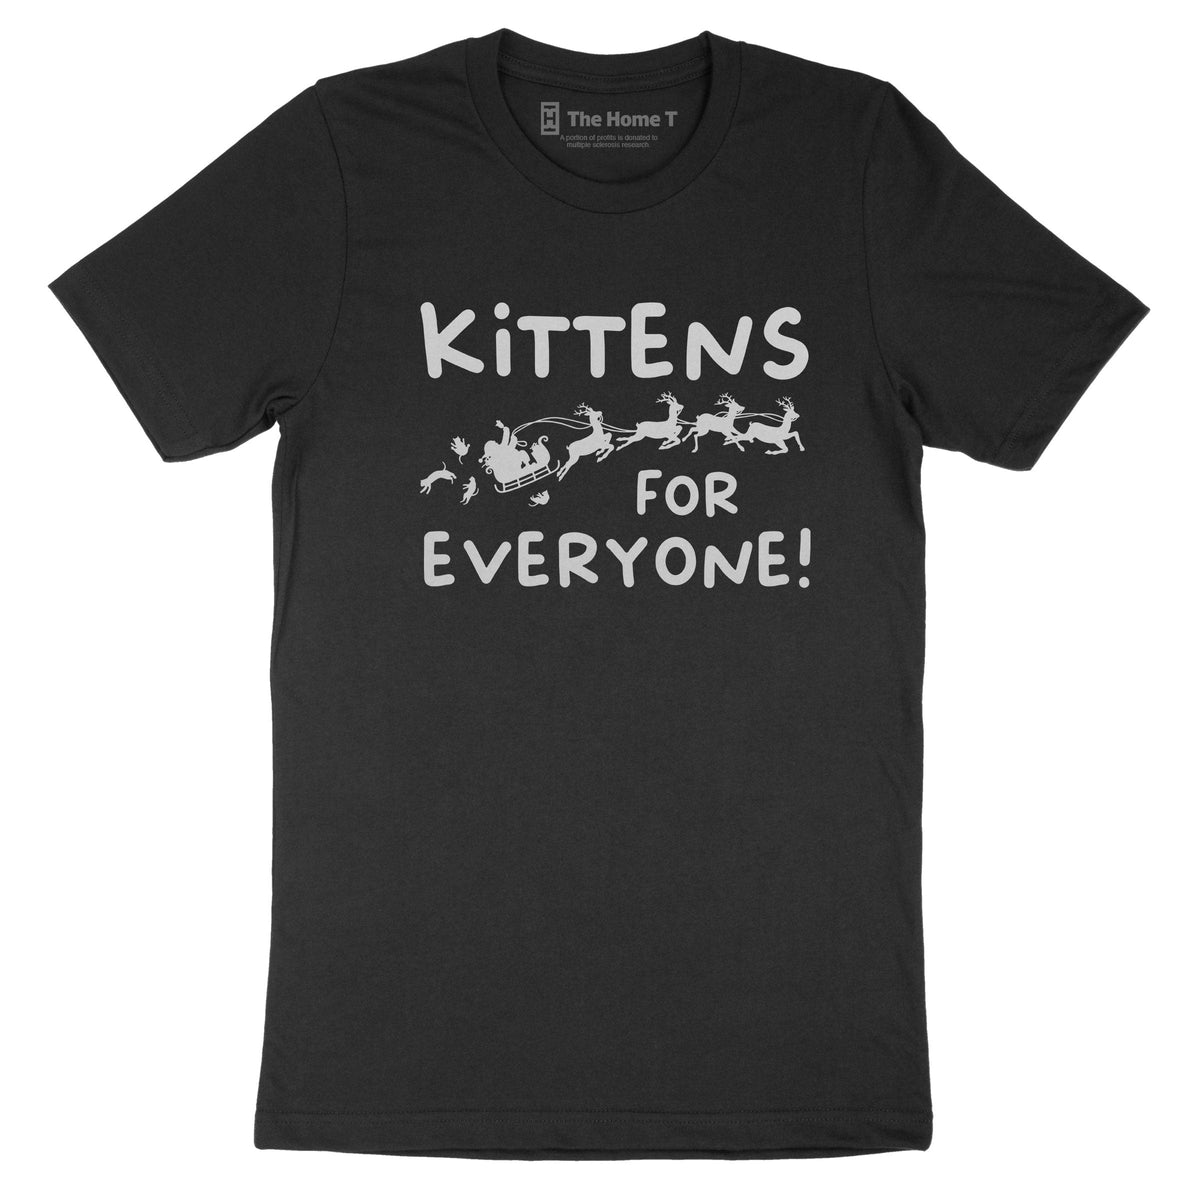 Kittens For Everyone!